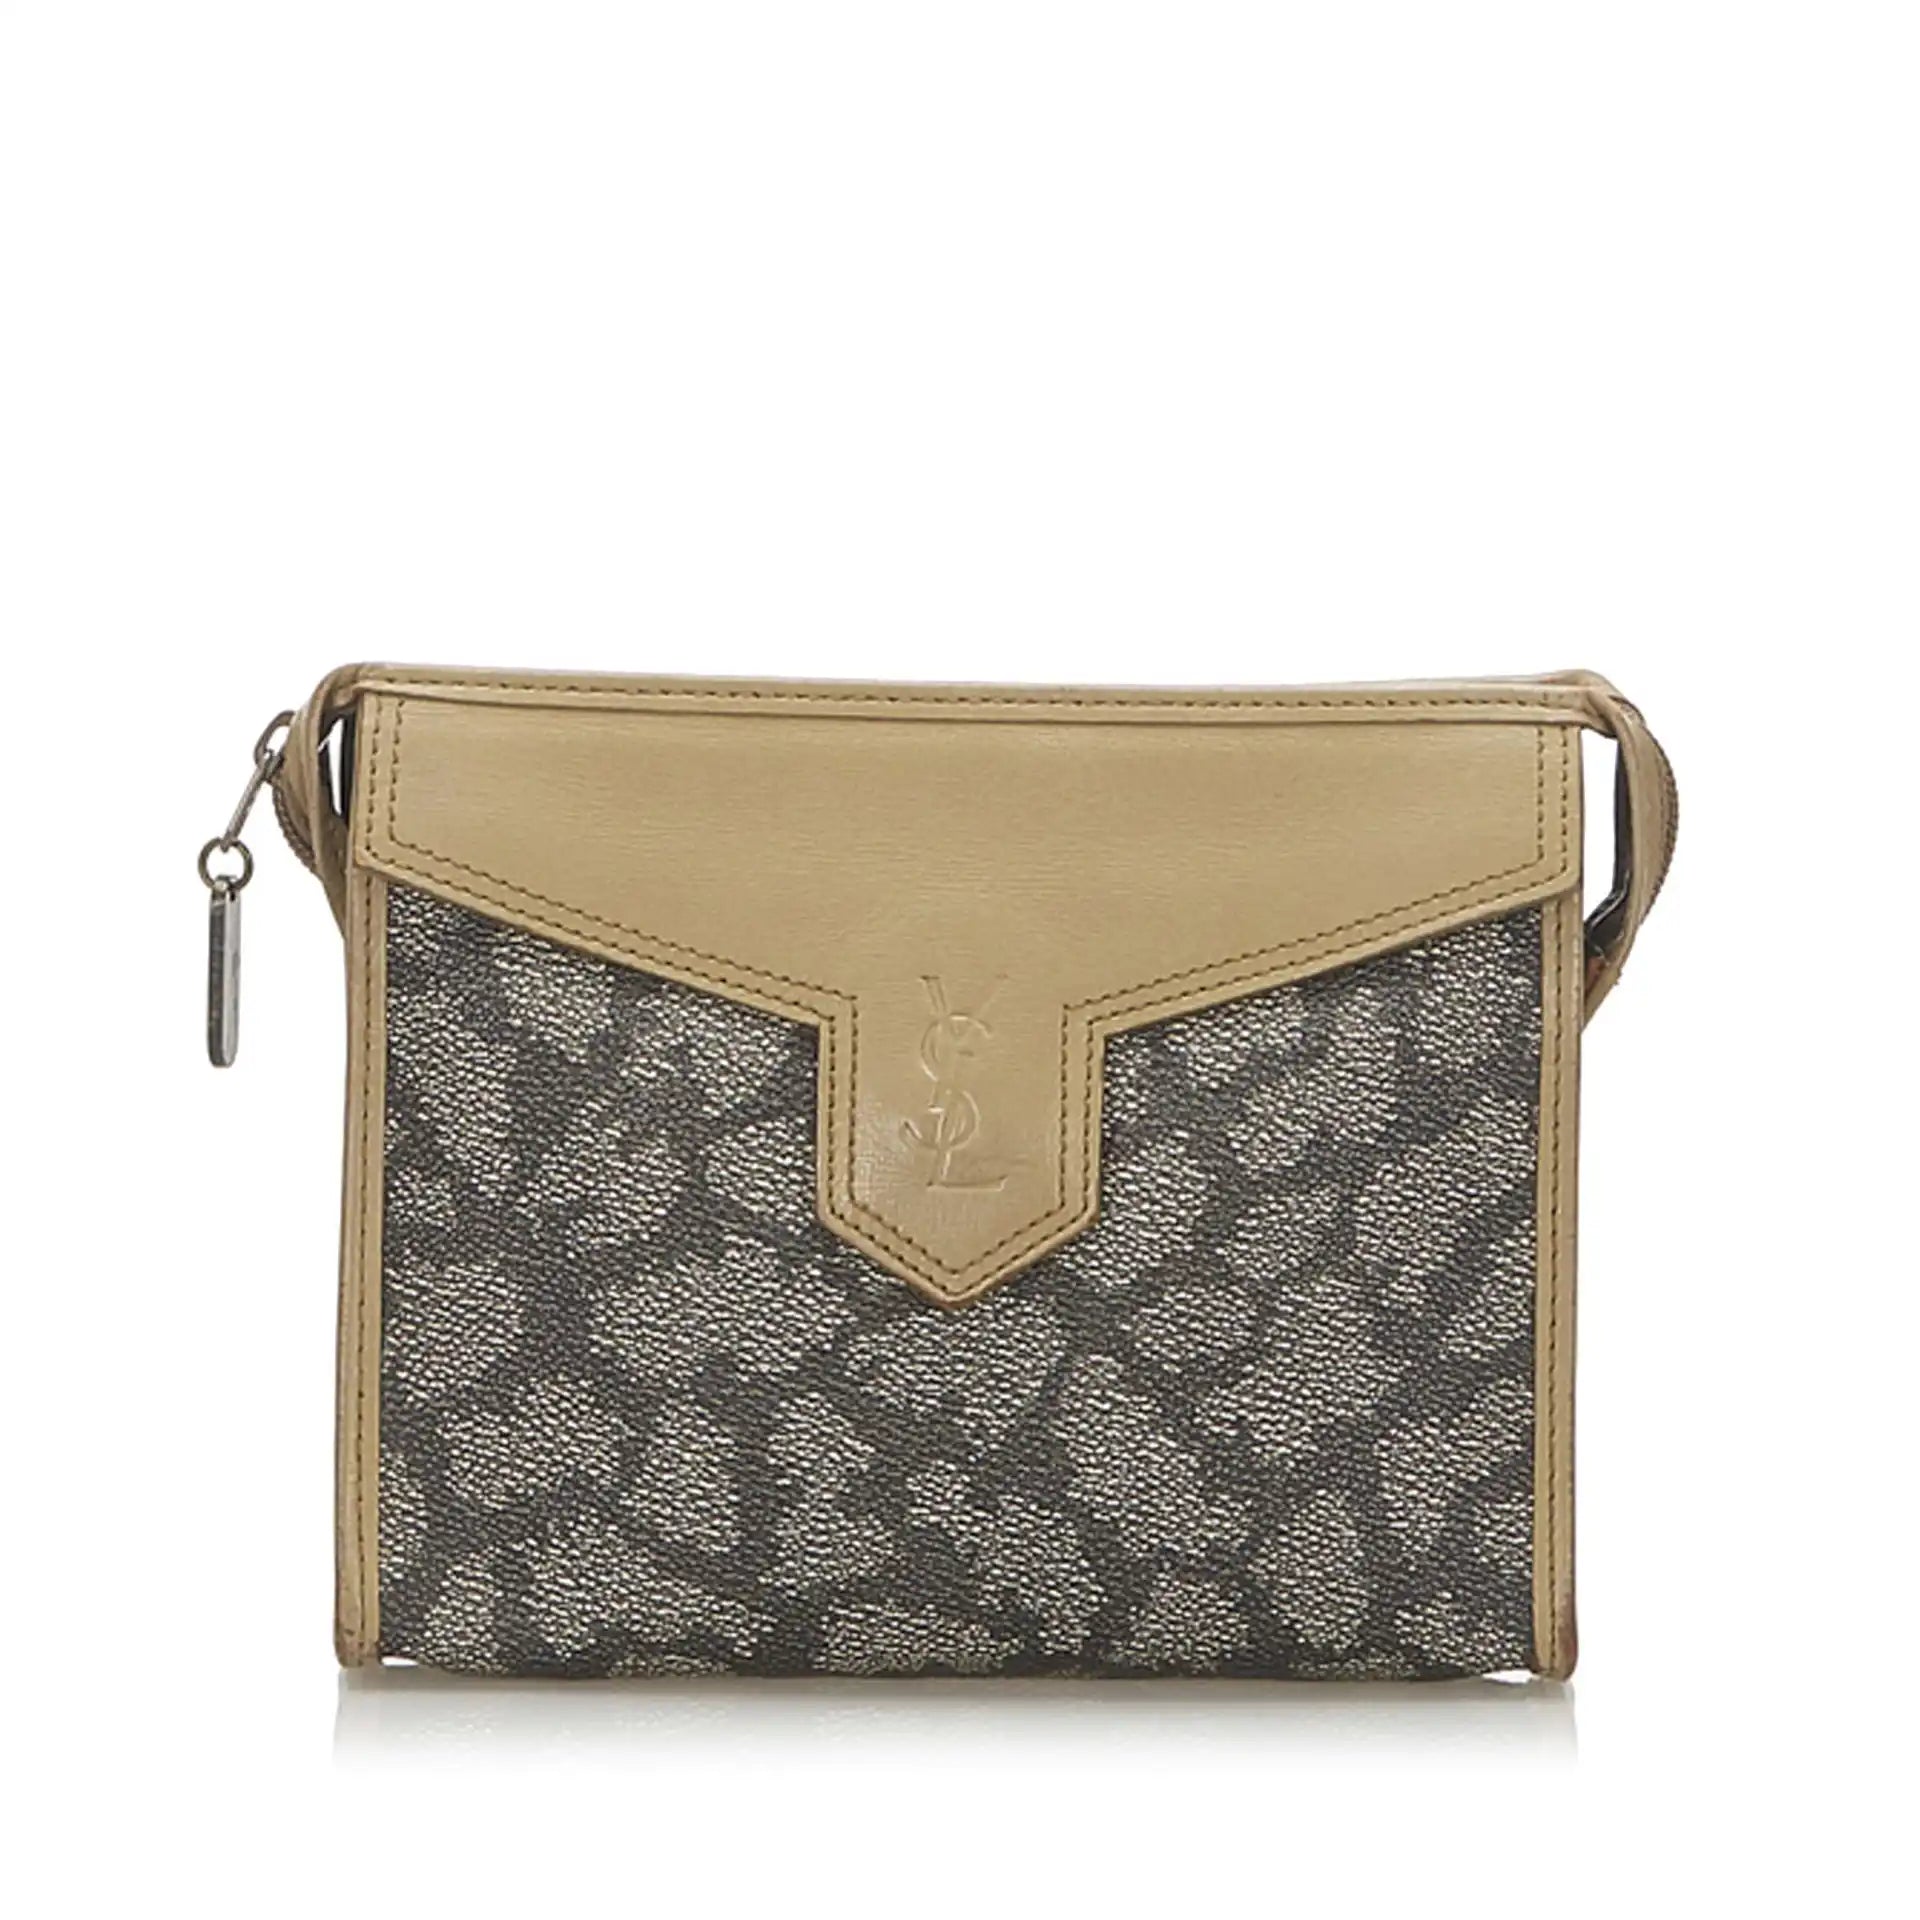 Yves Saint Laurent YSL Gray Printed Leather Clutch Bag With certificate of authenticity by Real Authentication